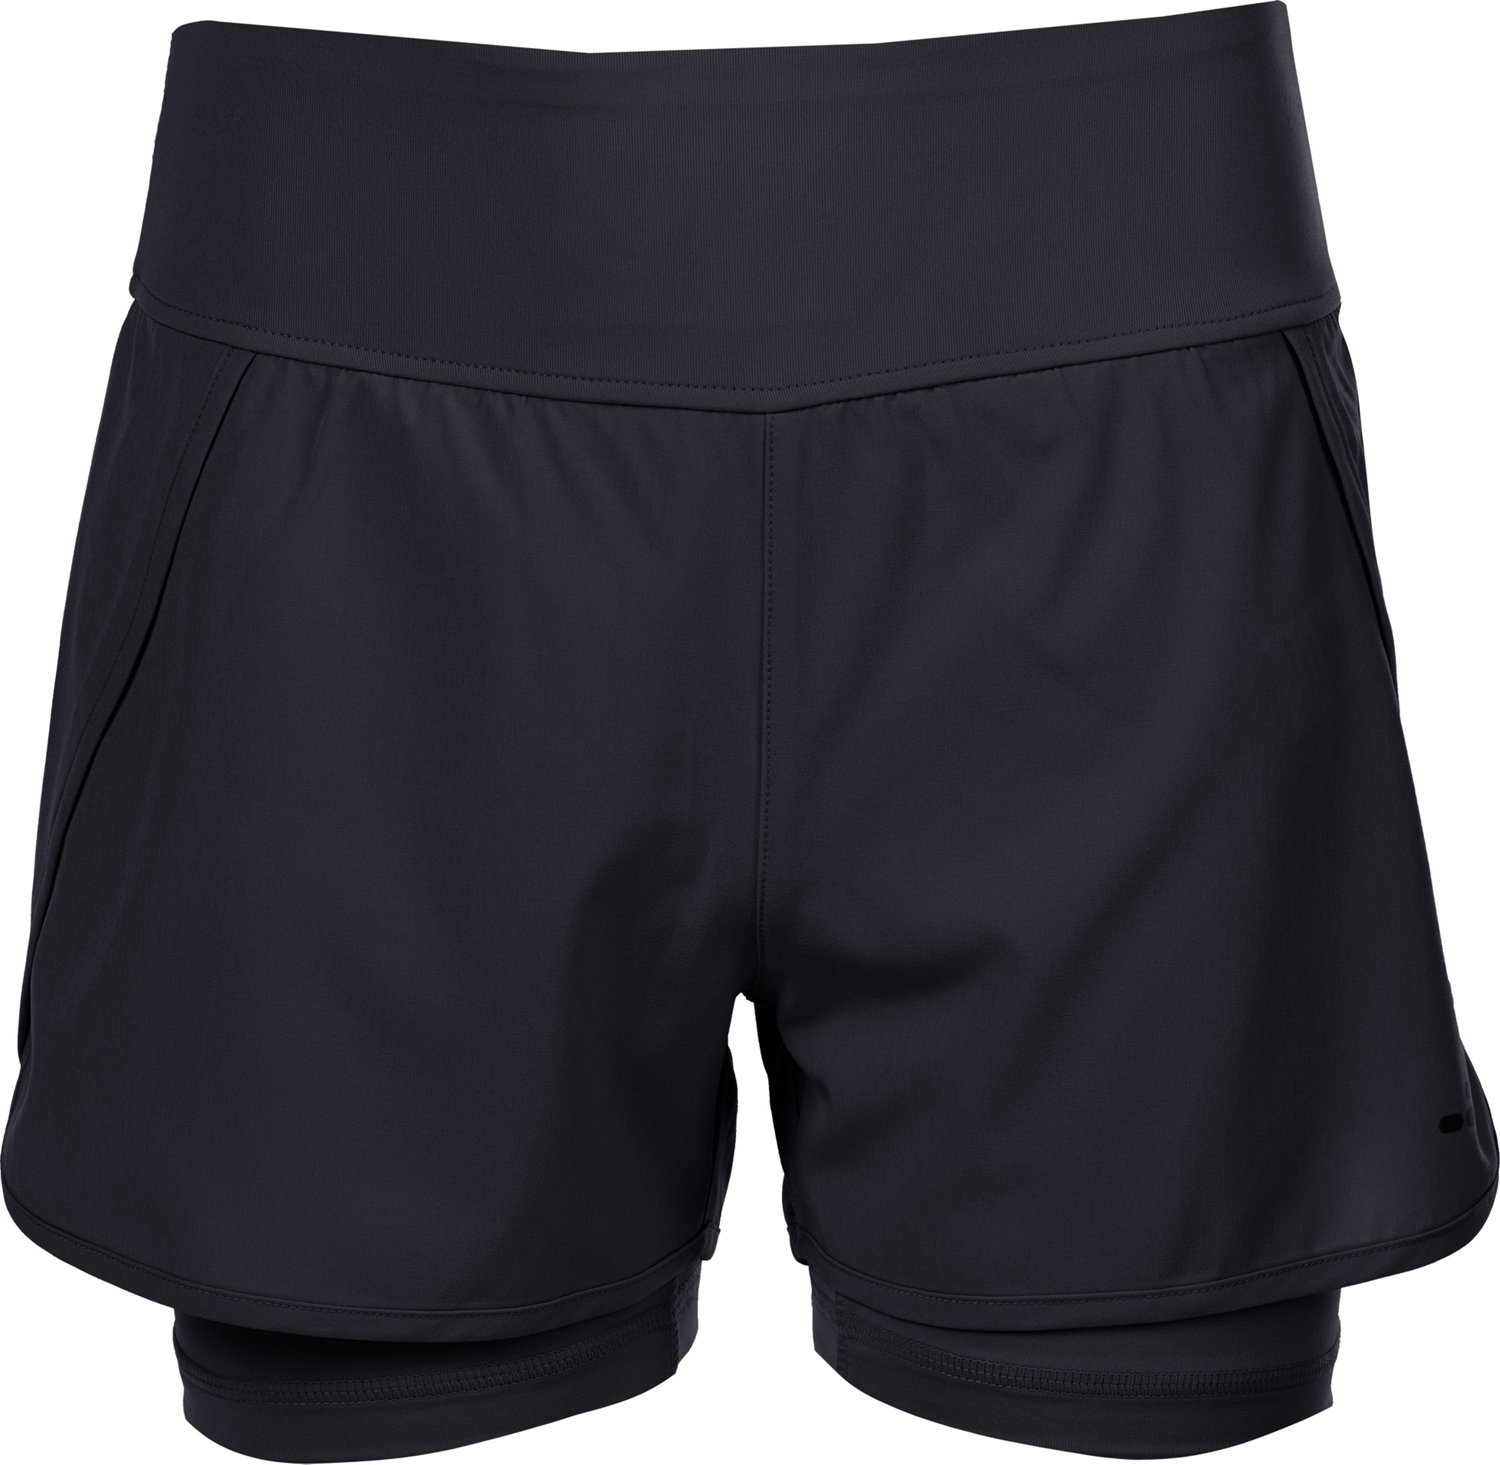 BCG Girls' Run Knit WB 2-in-1 Running Shorts                                                                                     - view number 1 selected